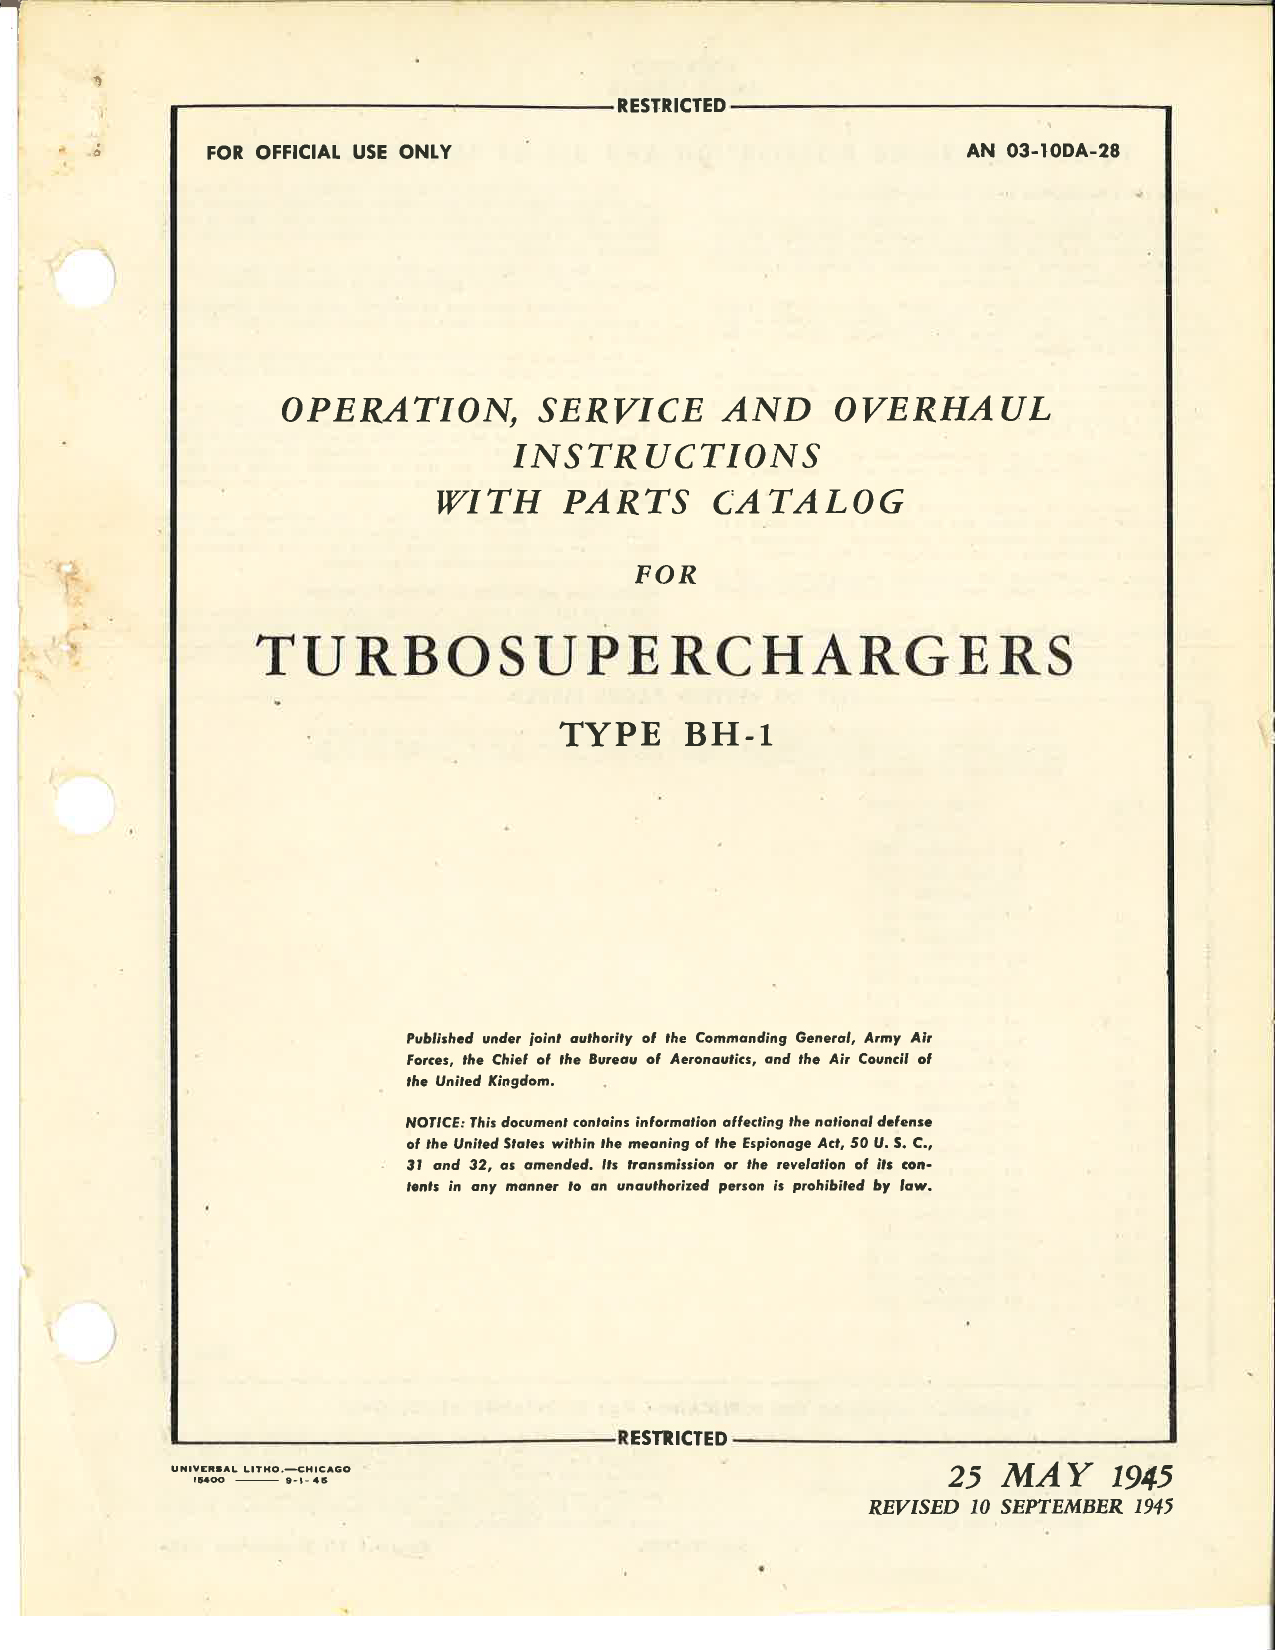 Sample page 1 from AirCorps Library document: Operation, Service, & Overhaul Instructions with Parts Catalog for Turbosuperchargers Type BH-1